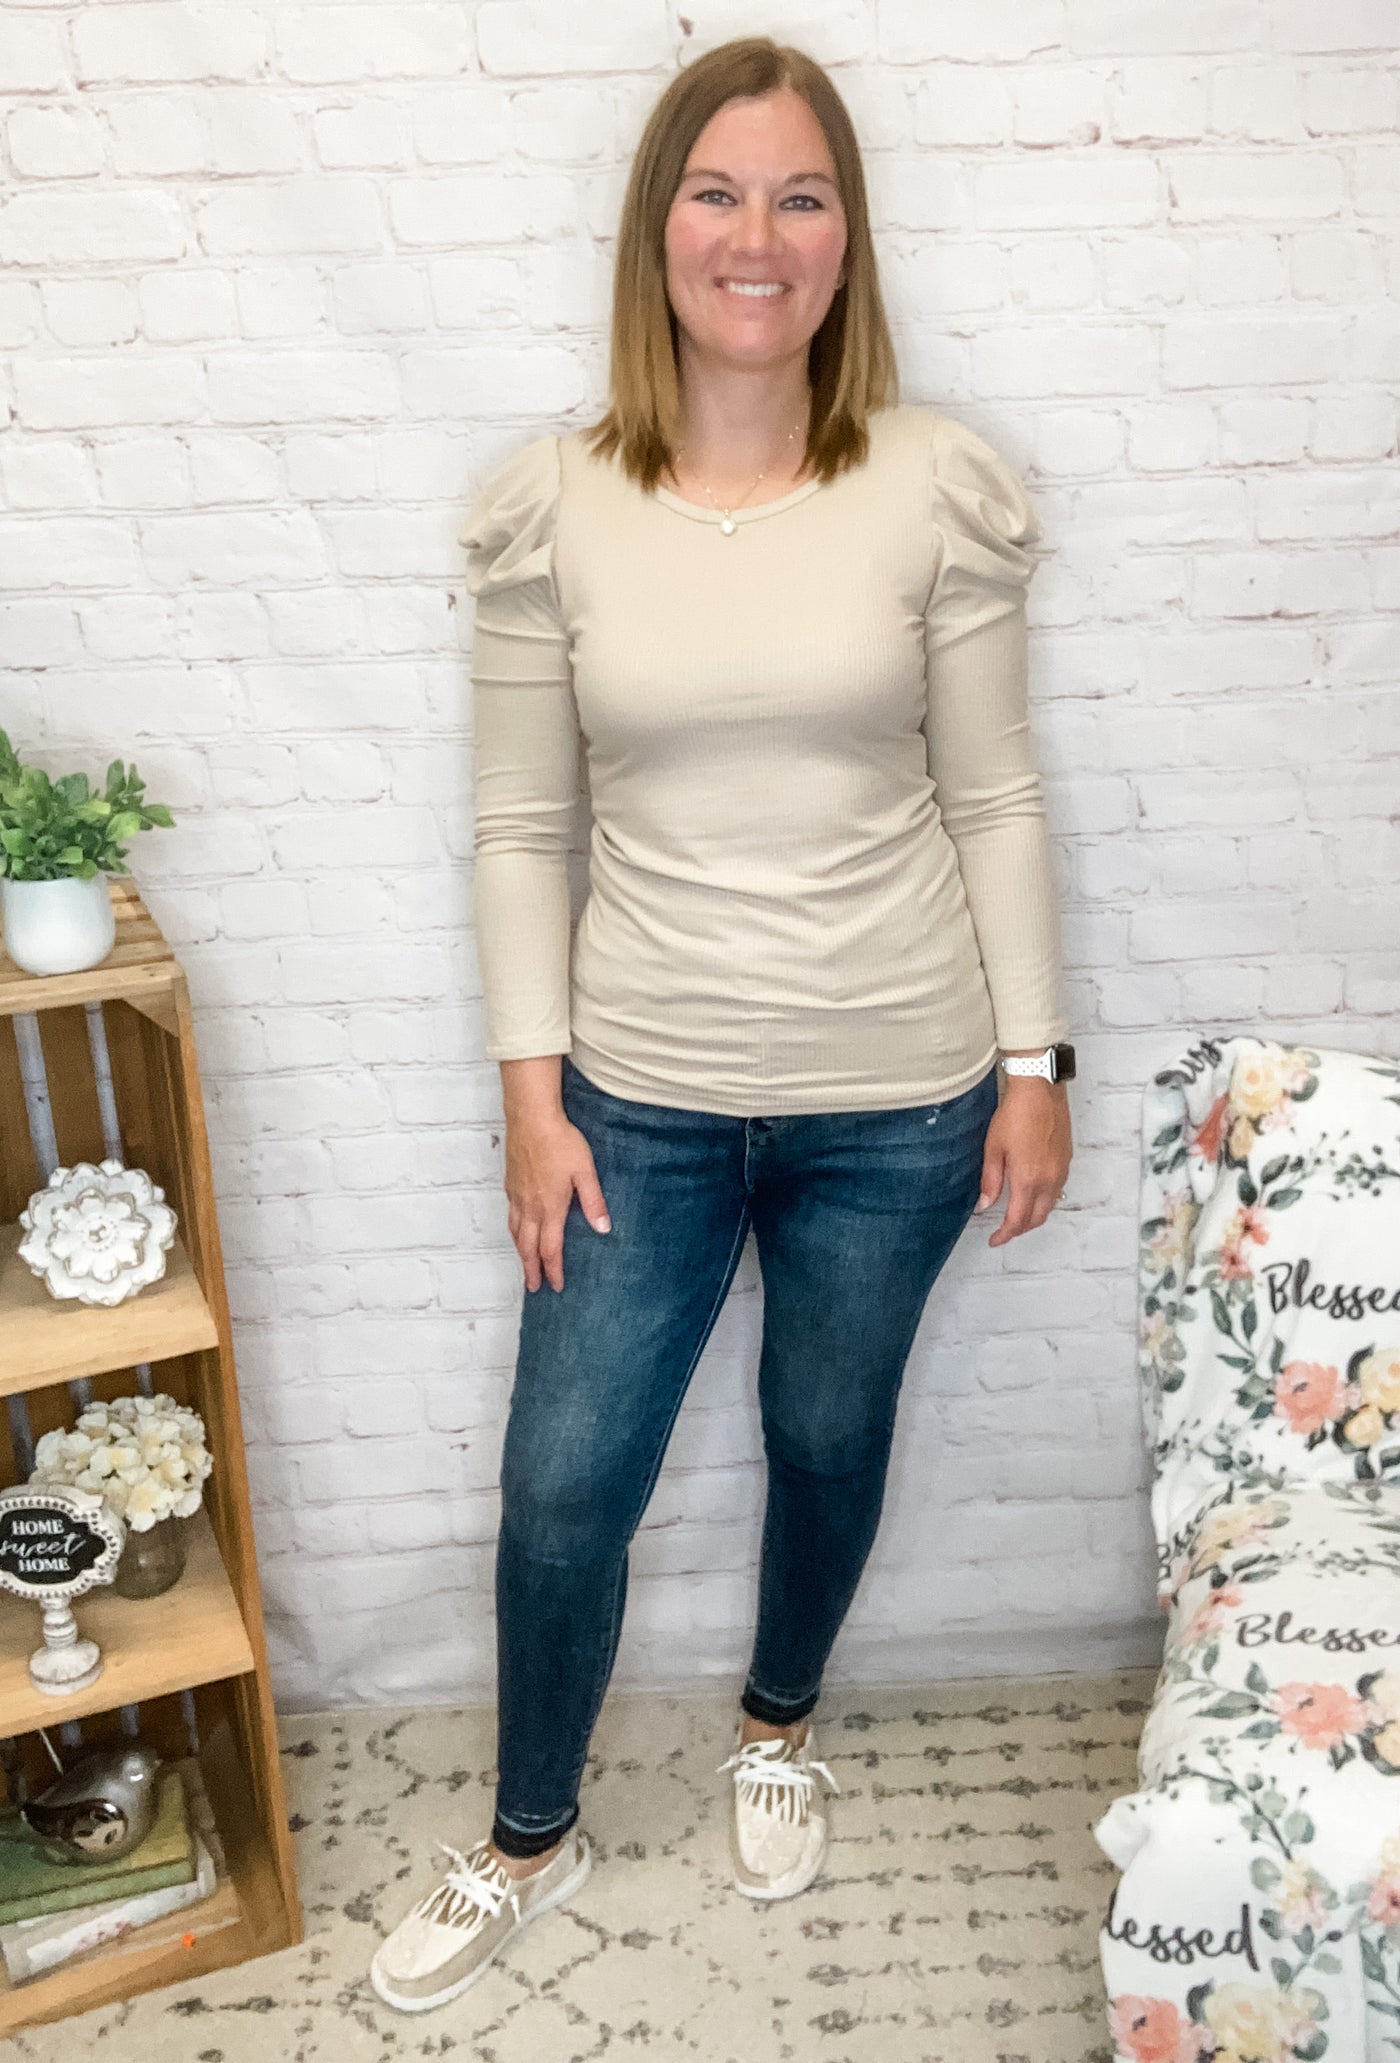 The Everyday Wear Taupe Top